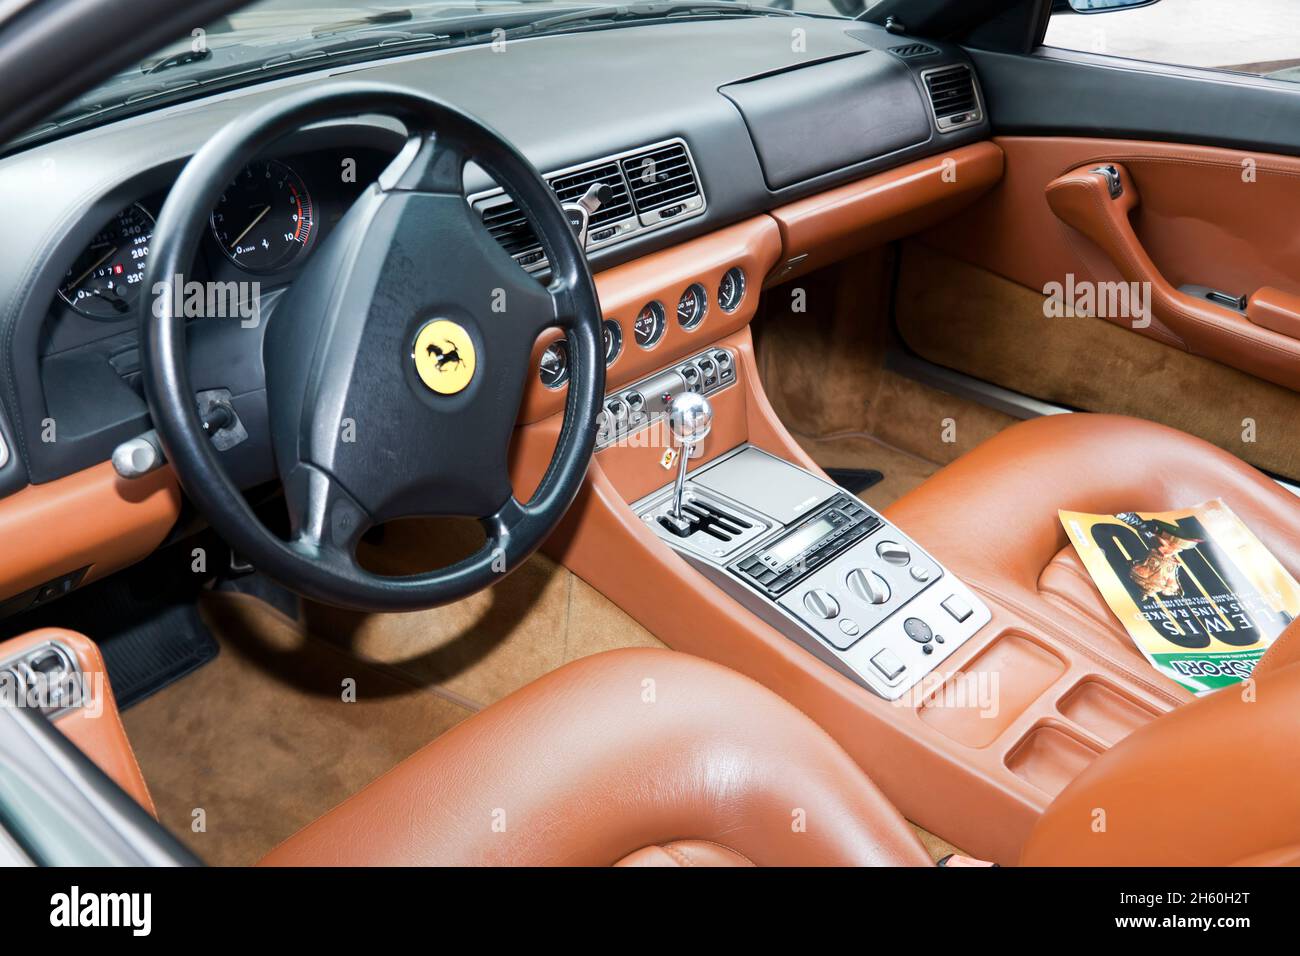 Interior view of a Green, 1995, Ferrari 456 GT,  on display at the 2021 Regents Street Motor Show Stock Photo